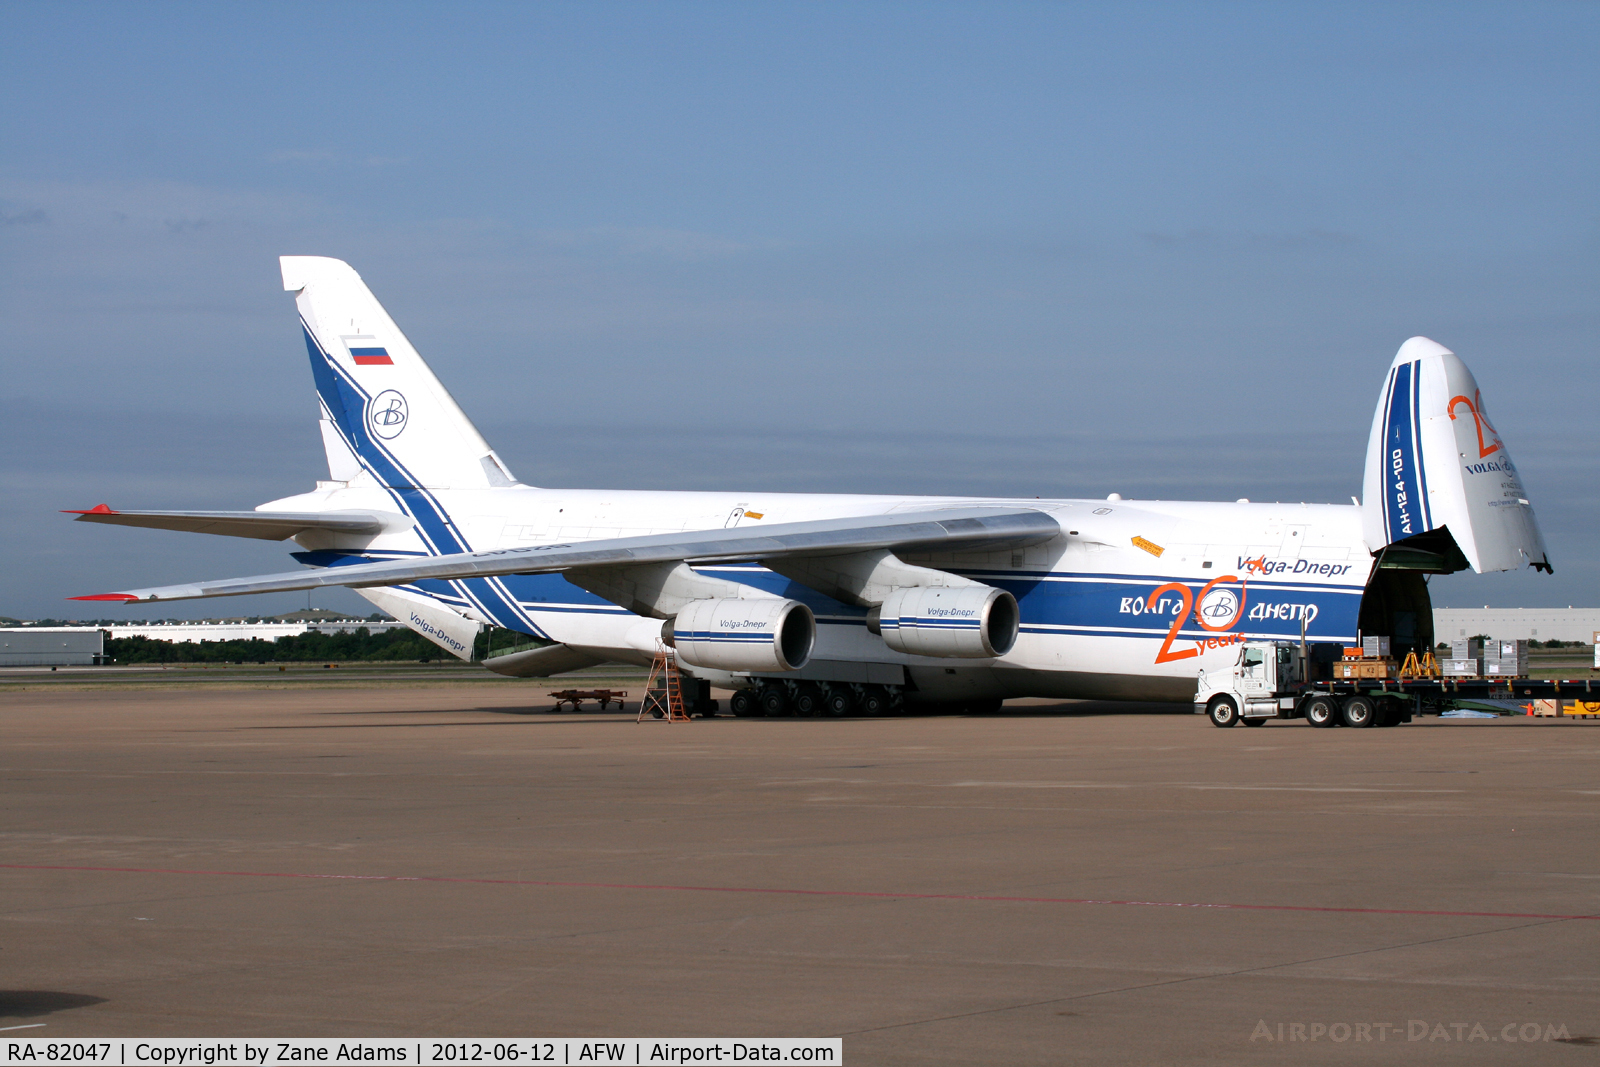 RA-82047, 1992 Antonov An-124-100 Ruslan C/N 9773053259121/0701, AN-124 at Alliance Airport - in town for Eurocopter X3 transport.